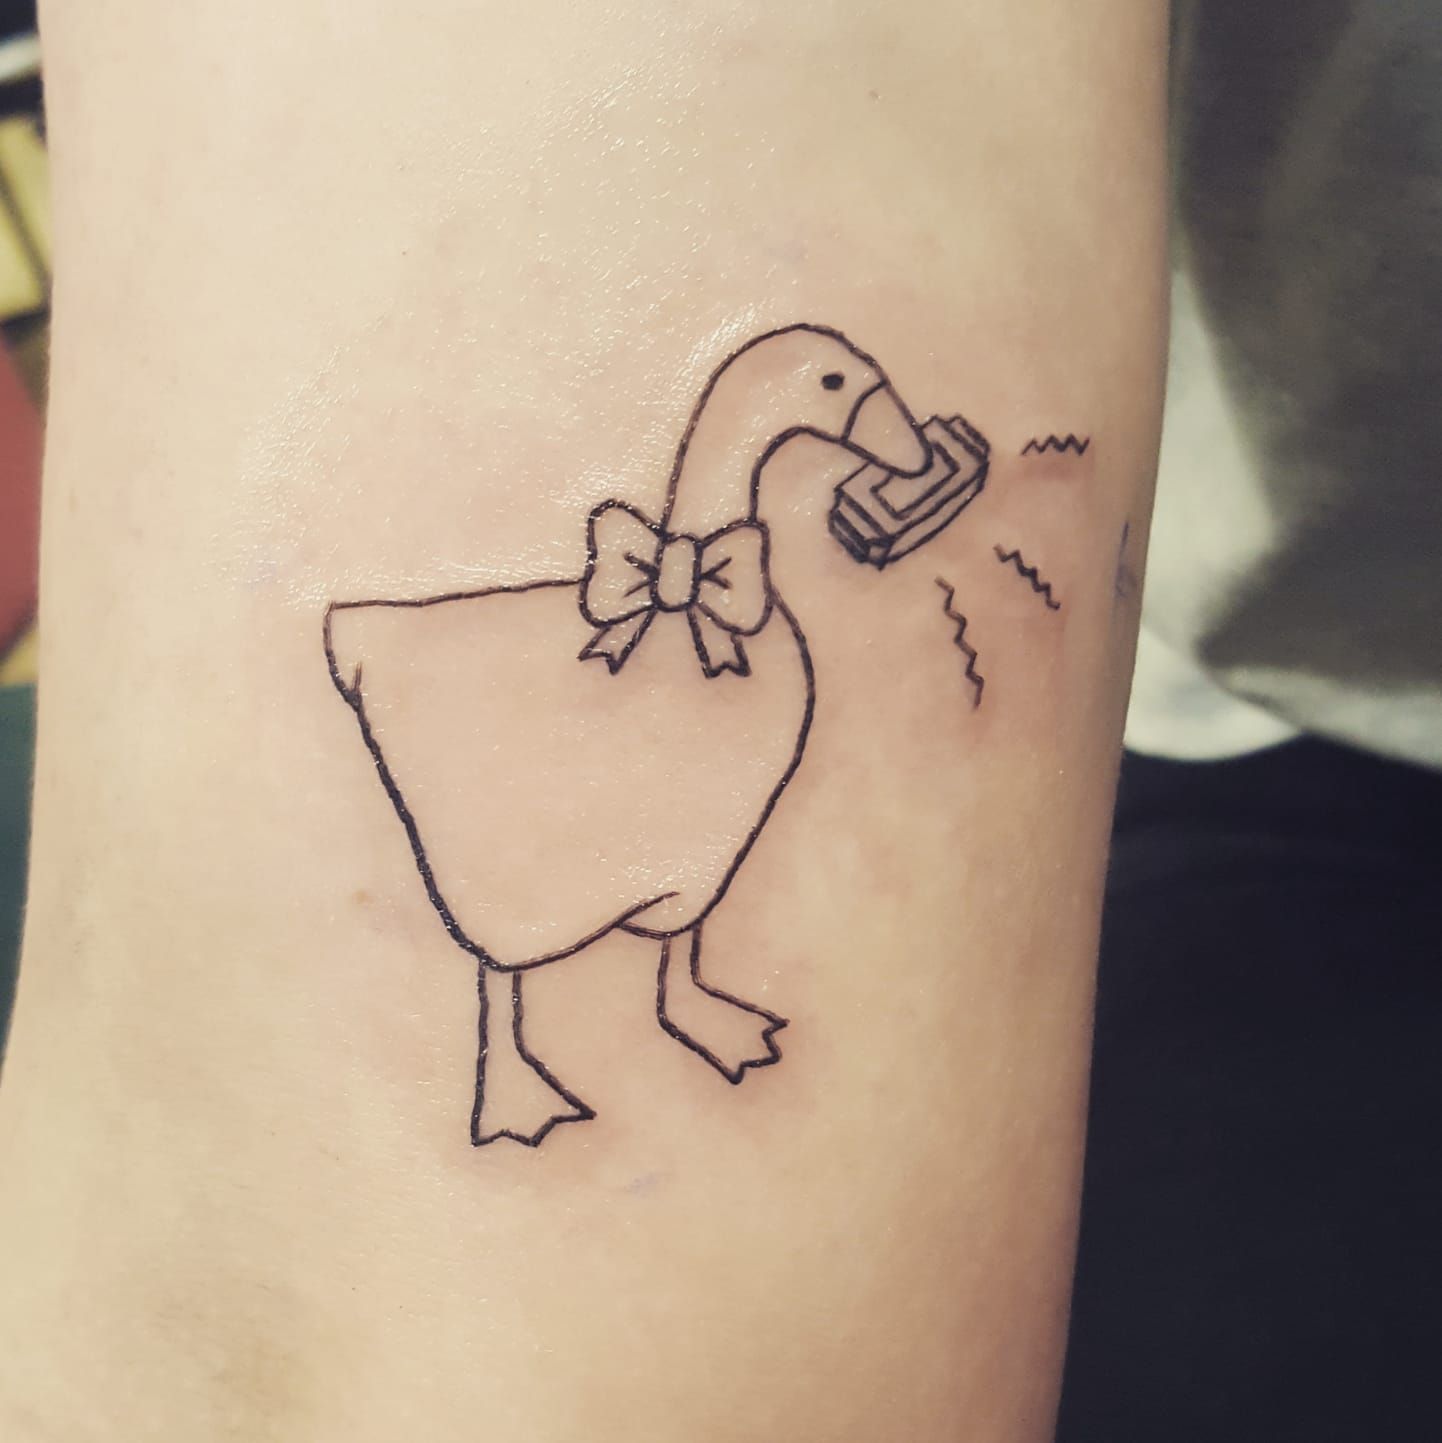 Tattoos by Rian  If you havent played Untitled Goose Game yet you  havent lived So fun to do this one on digglestattoos during my guestspot  with the rad people at whiterocktattoo